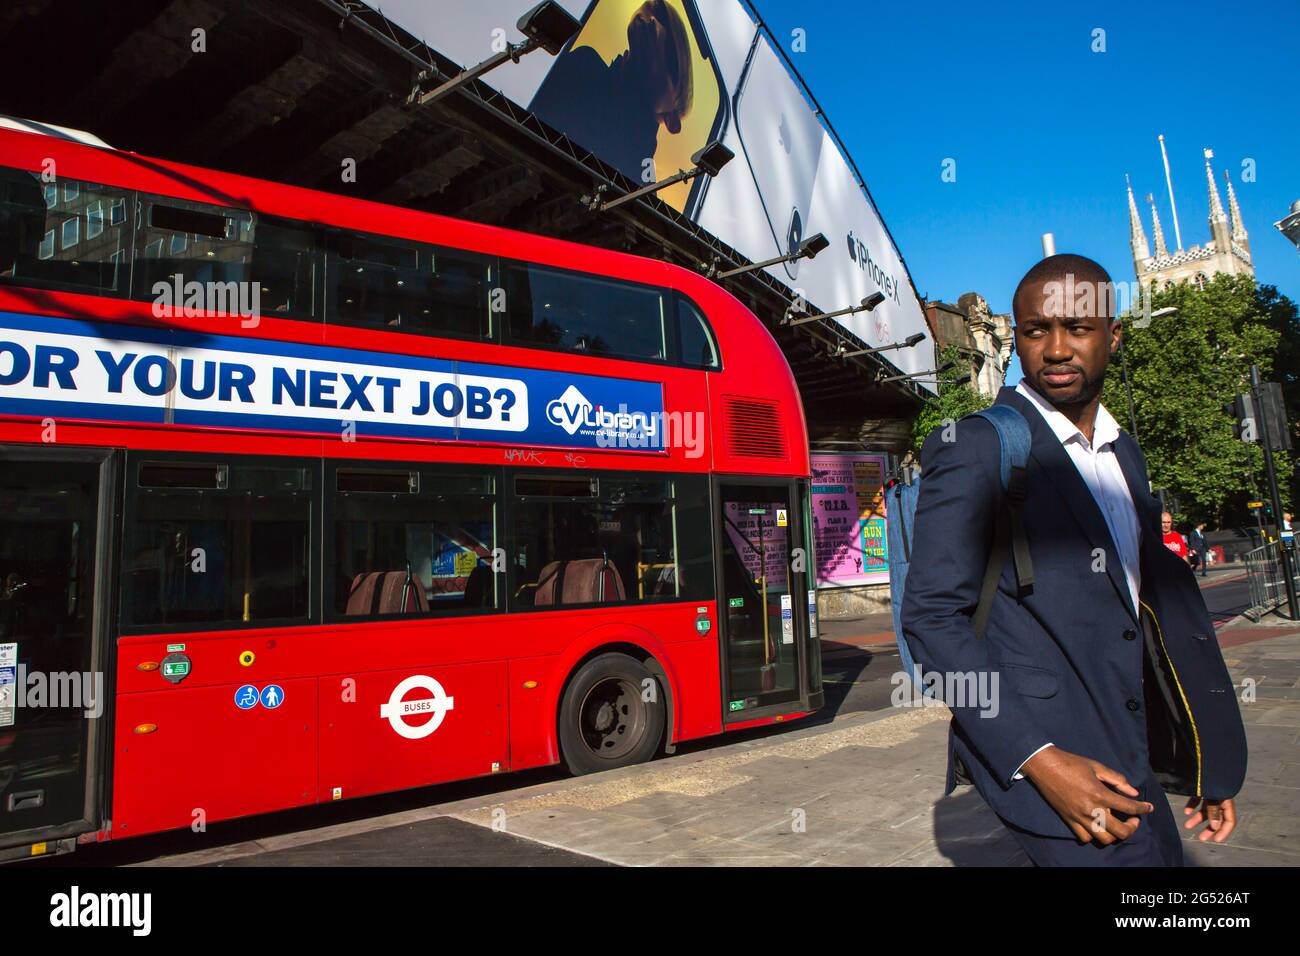 UNITED KINGDOM. LONDON. CLOSE TO THE LONDON BRIDGE, ADVERTISING 'LOOKING FOR YOUR NEXT JOB' ON A DOUBLE DECK BUS Stock Photo